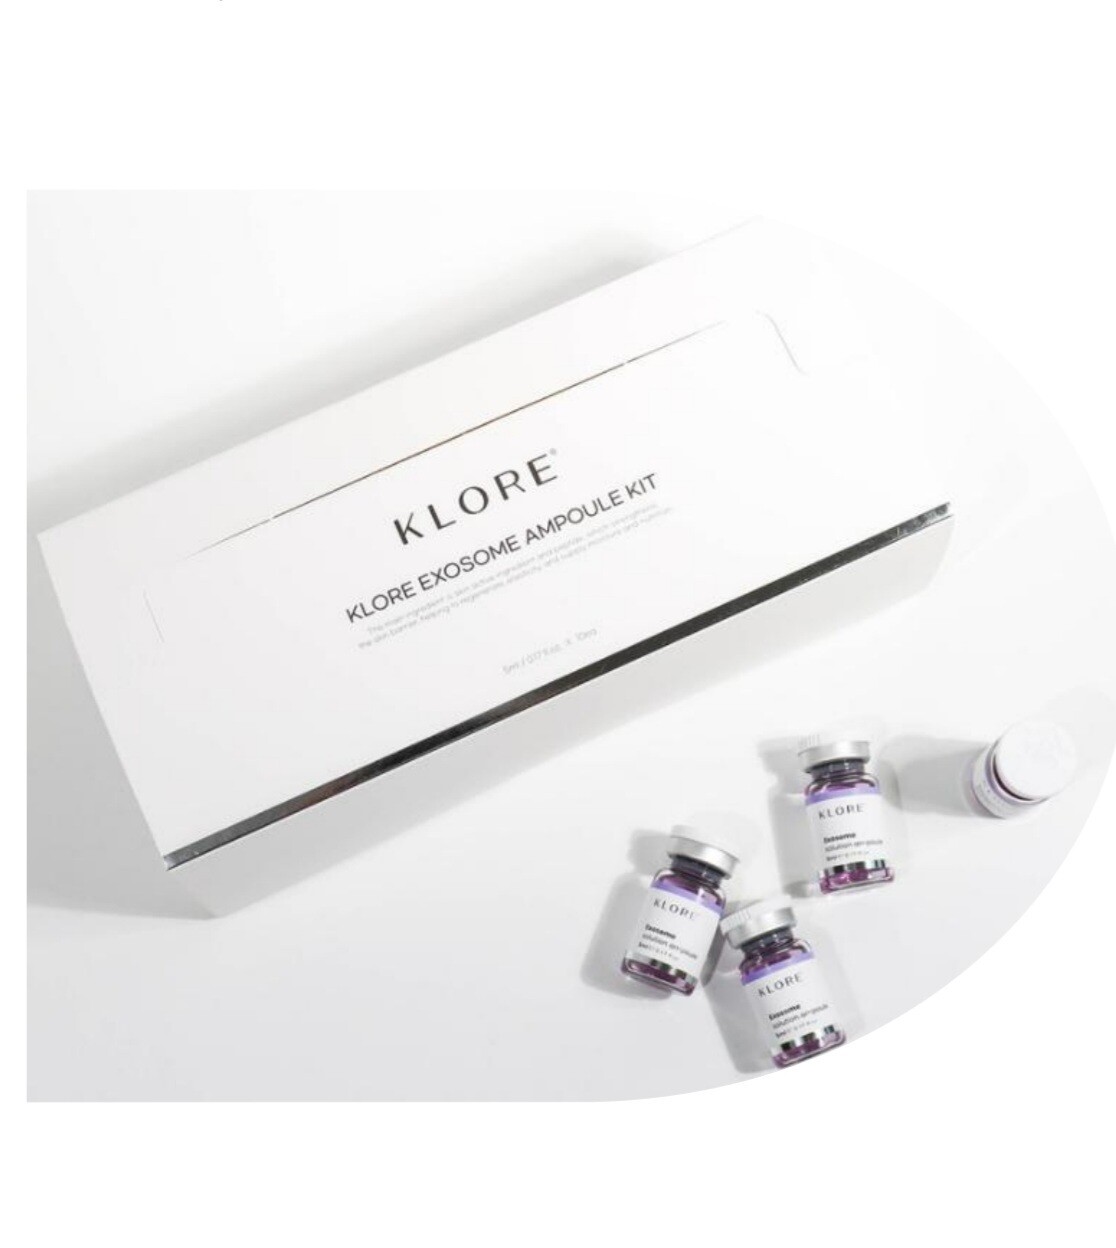 Klore Exosome Ampoule Kit